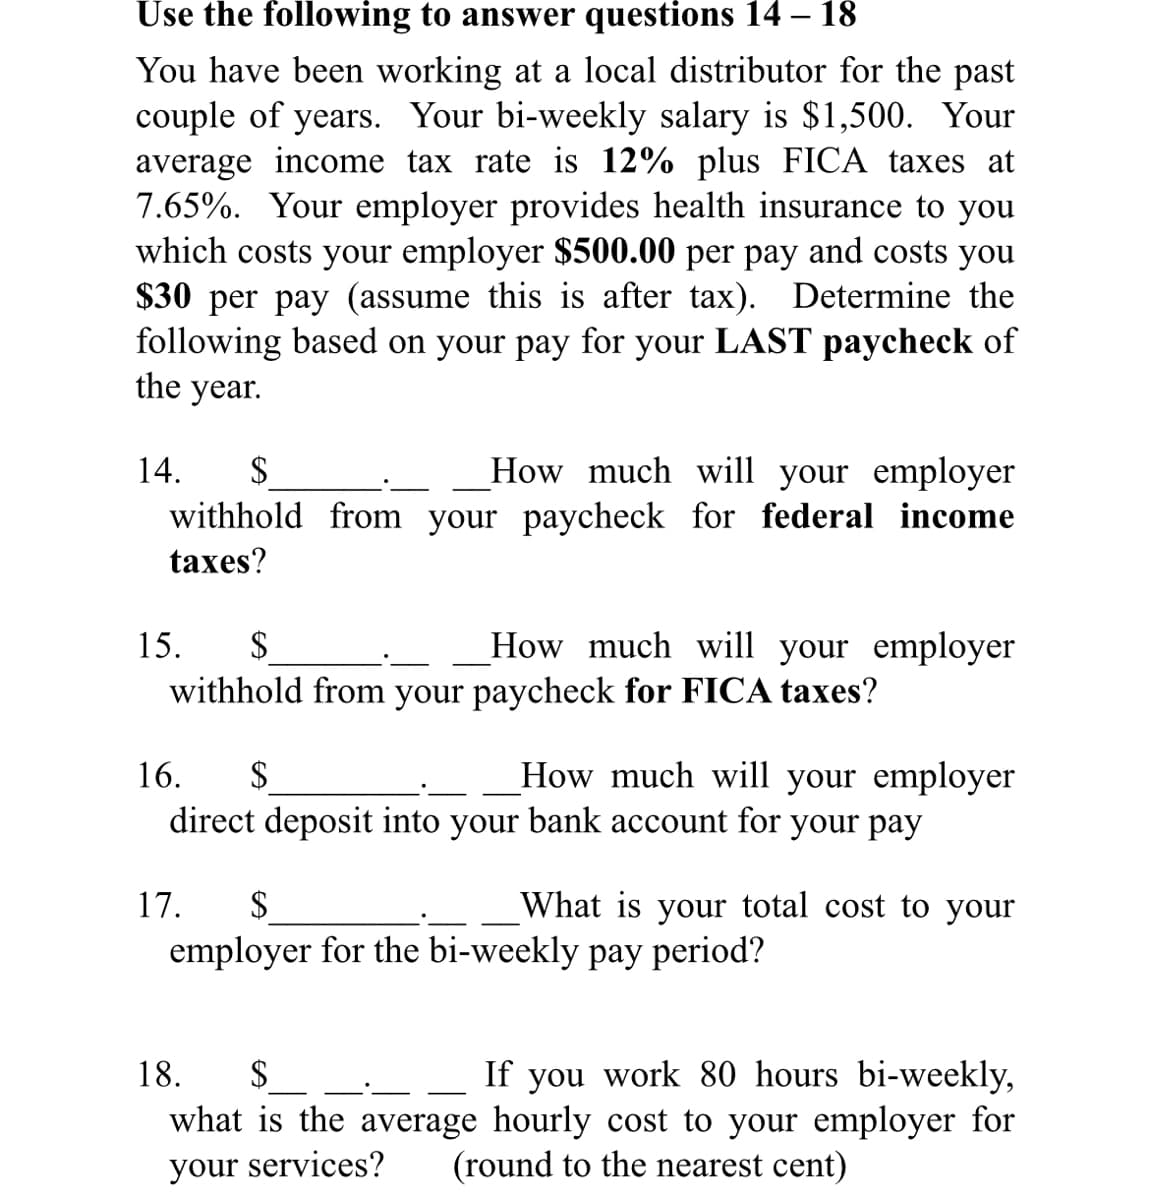 Use the following to answer questions 14 – 18
You have been working at a local distributor for the past
couple of years. Your bi-weekly salary is $1,500. Your
average income tax rate is 12% plus FICA taxes at
7.65%. Your employer provides health insurance to you
which costs your employer $500.00 per pay and costs you
$30 per pay (assume this is after tax). Determine the
following based on your pay for your LAST paycheck of
the year.
How much will your employer
withhold from your paycheck for federal income
14.
$
taxes?
15.
2$
How much will your employer
withhold from your paycheck for FICA taxes?
How much will your employer
direct deposit into your bank account for your pay
16.
$
17.
$
What is your total cost to your
employer for the bi-weekly pay period?
$4
If you work 80 hours bi-weekly,
what is the average hourly cost to your employer for
(round to the nearest cent)
18.
your services?
